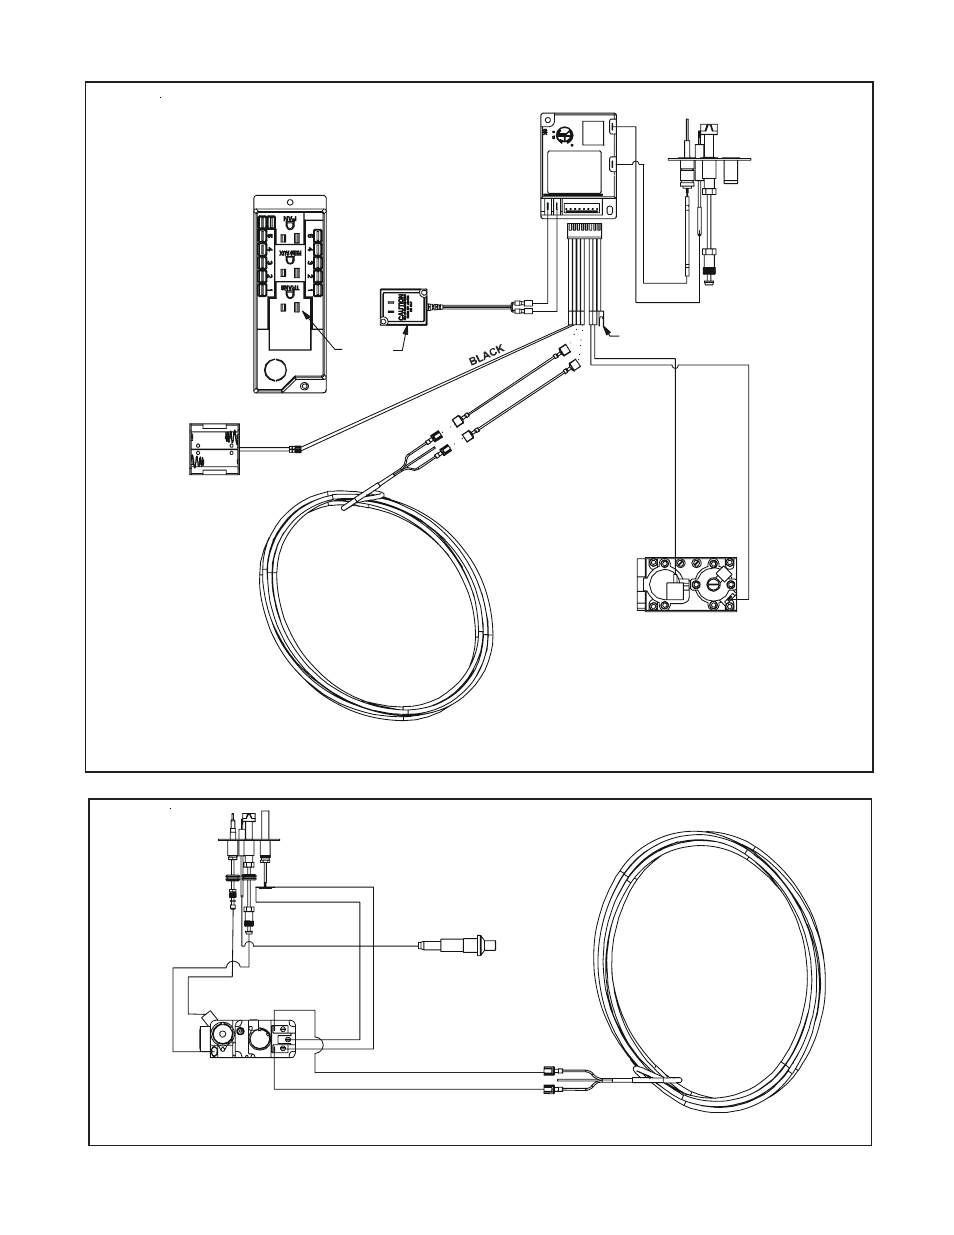 Figure 8  Standing Pilot Ignition Wiring Diagram